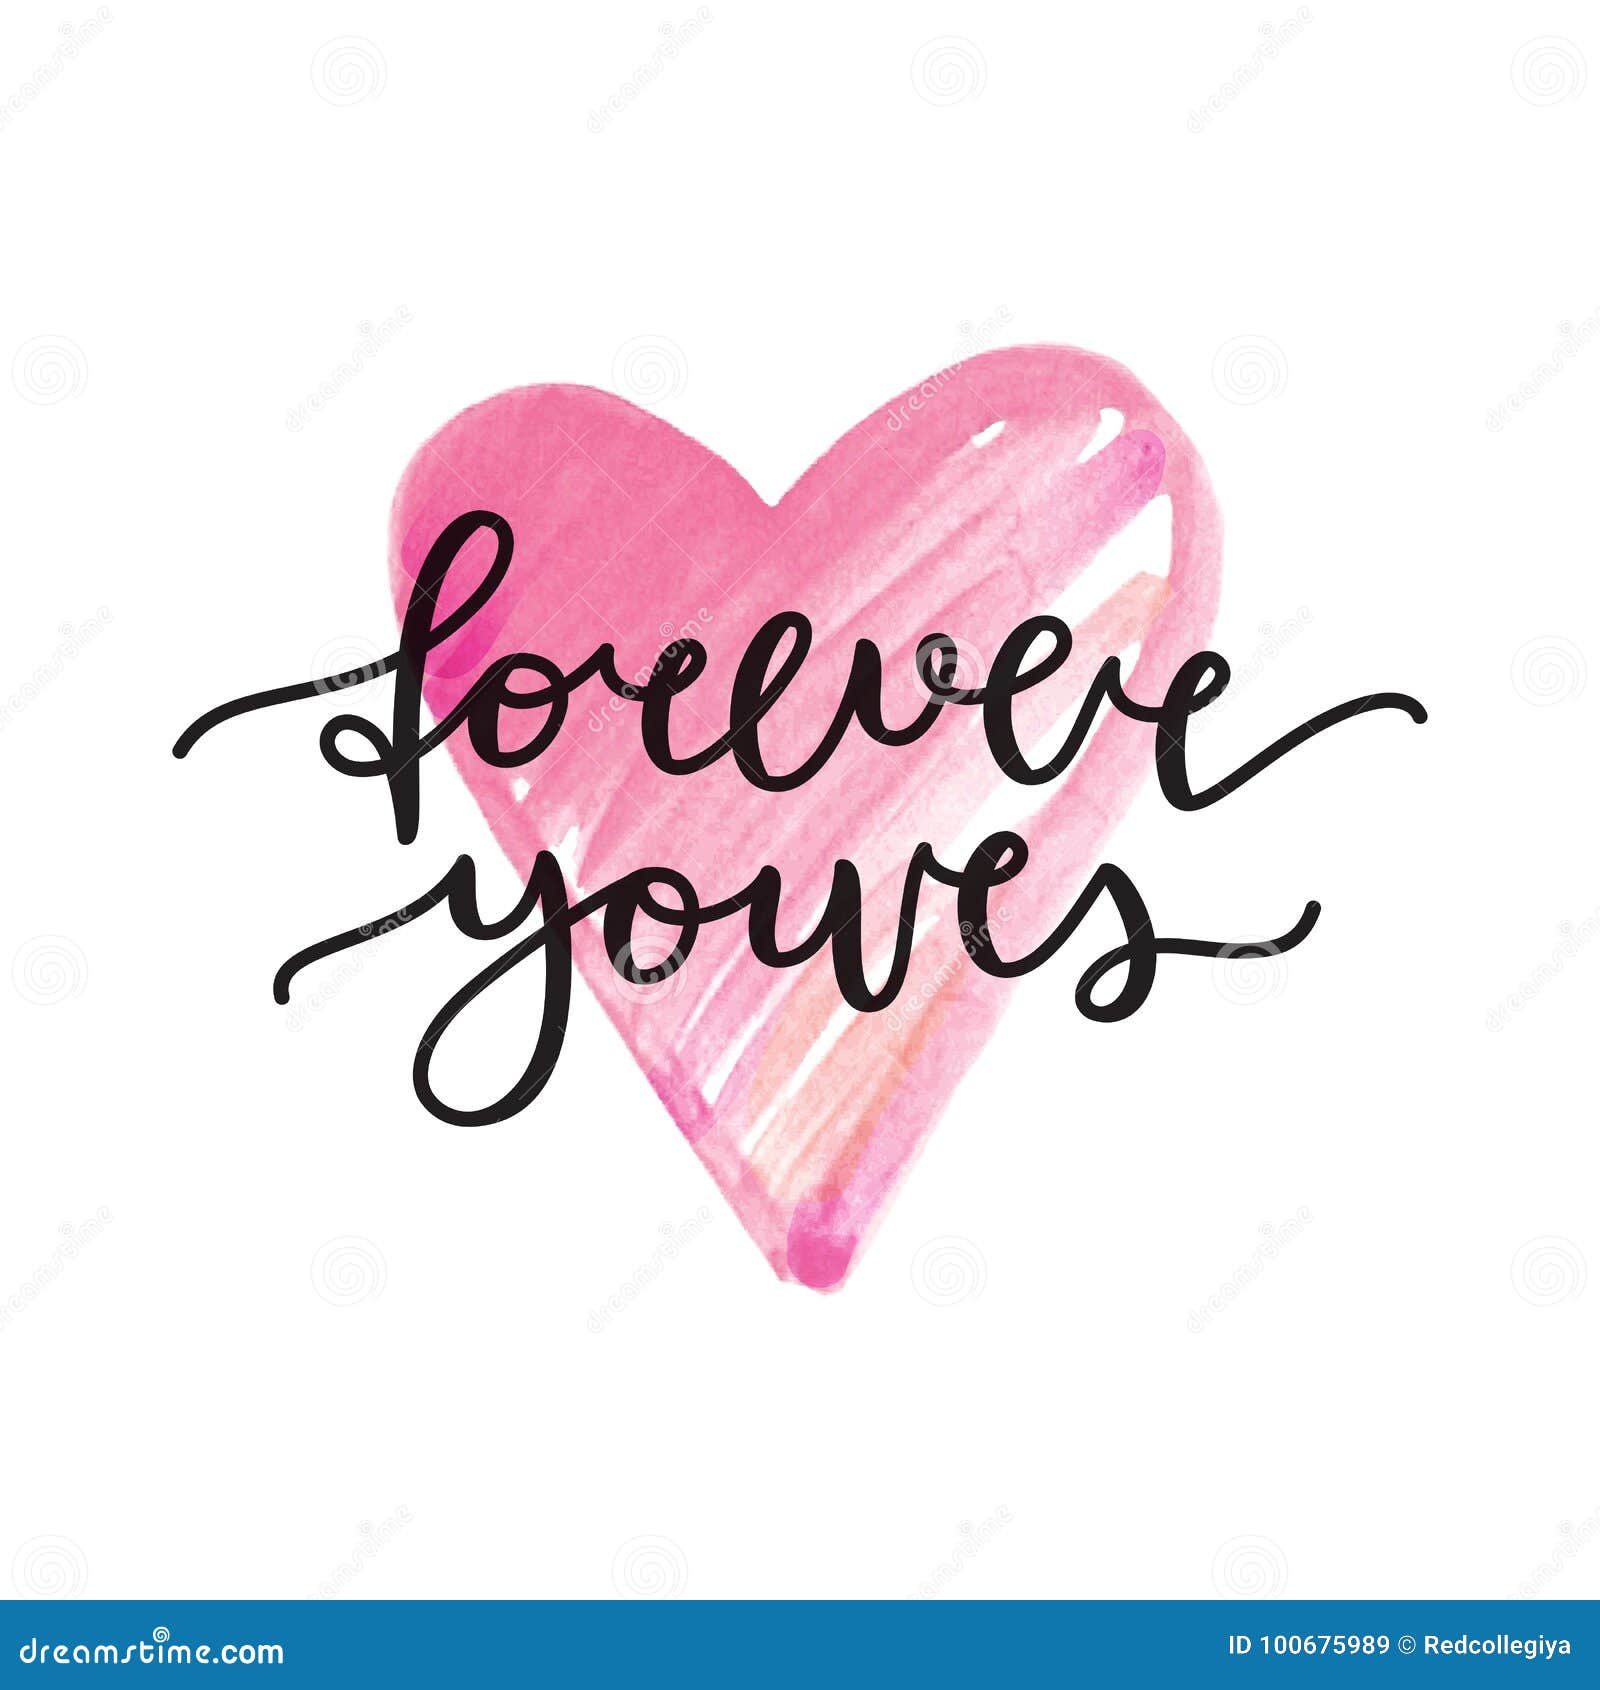 Forever yours lettering stock vector. Illustration of text - 100675989